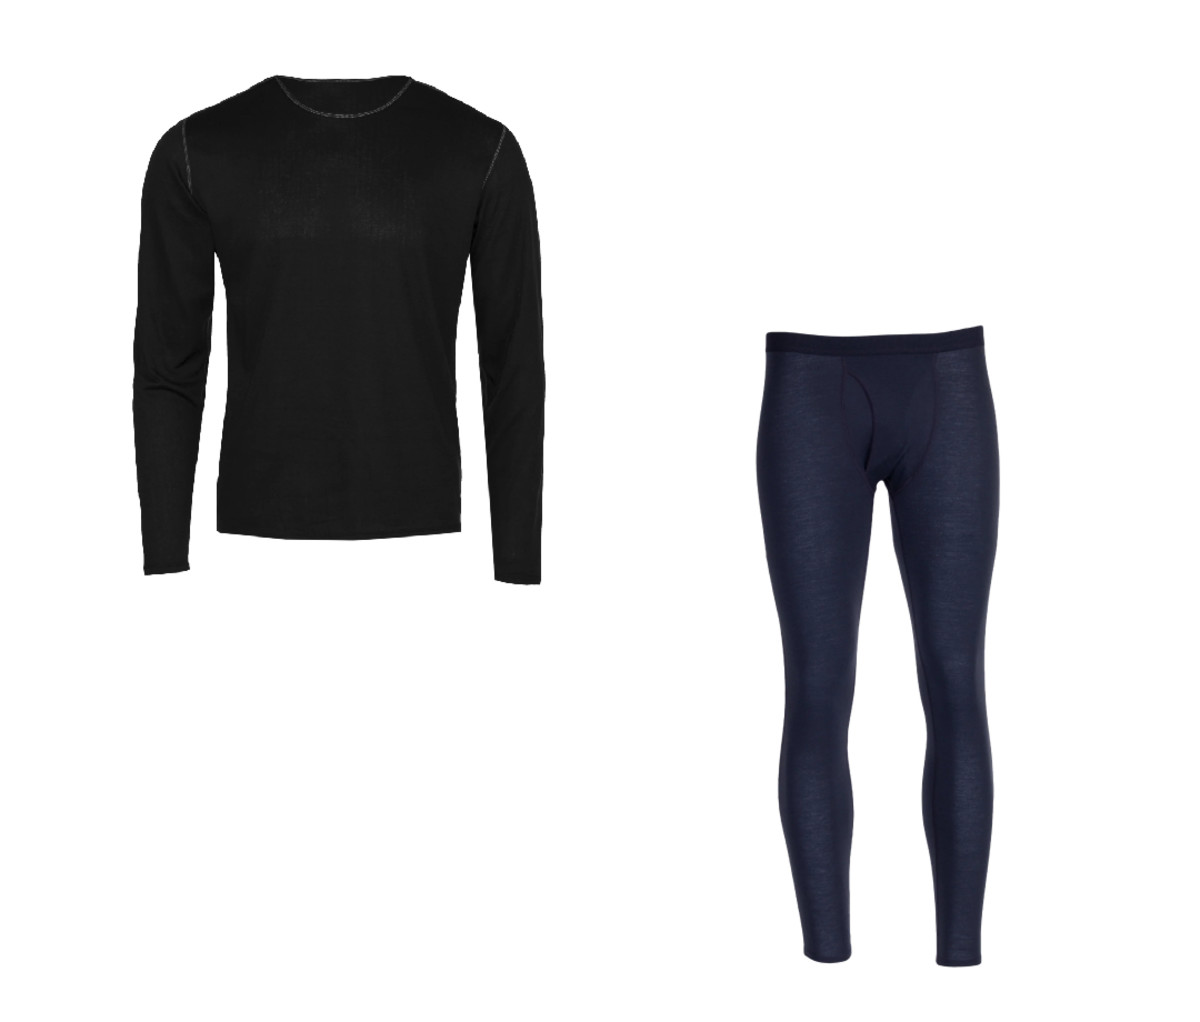 Best Men's Thermal Underwear for Extreme Cold– Thermajane